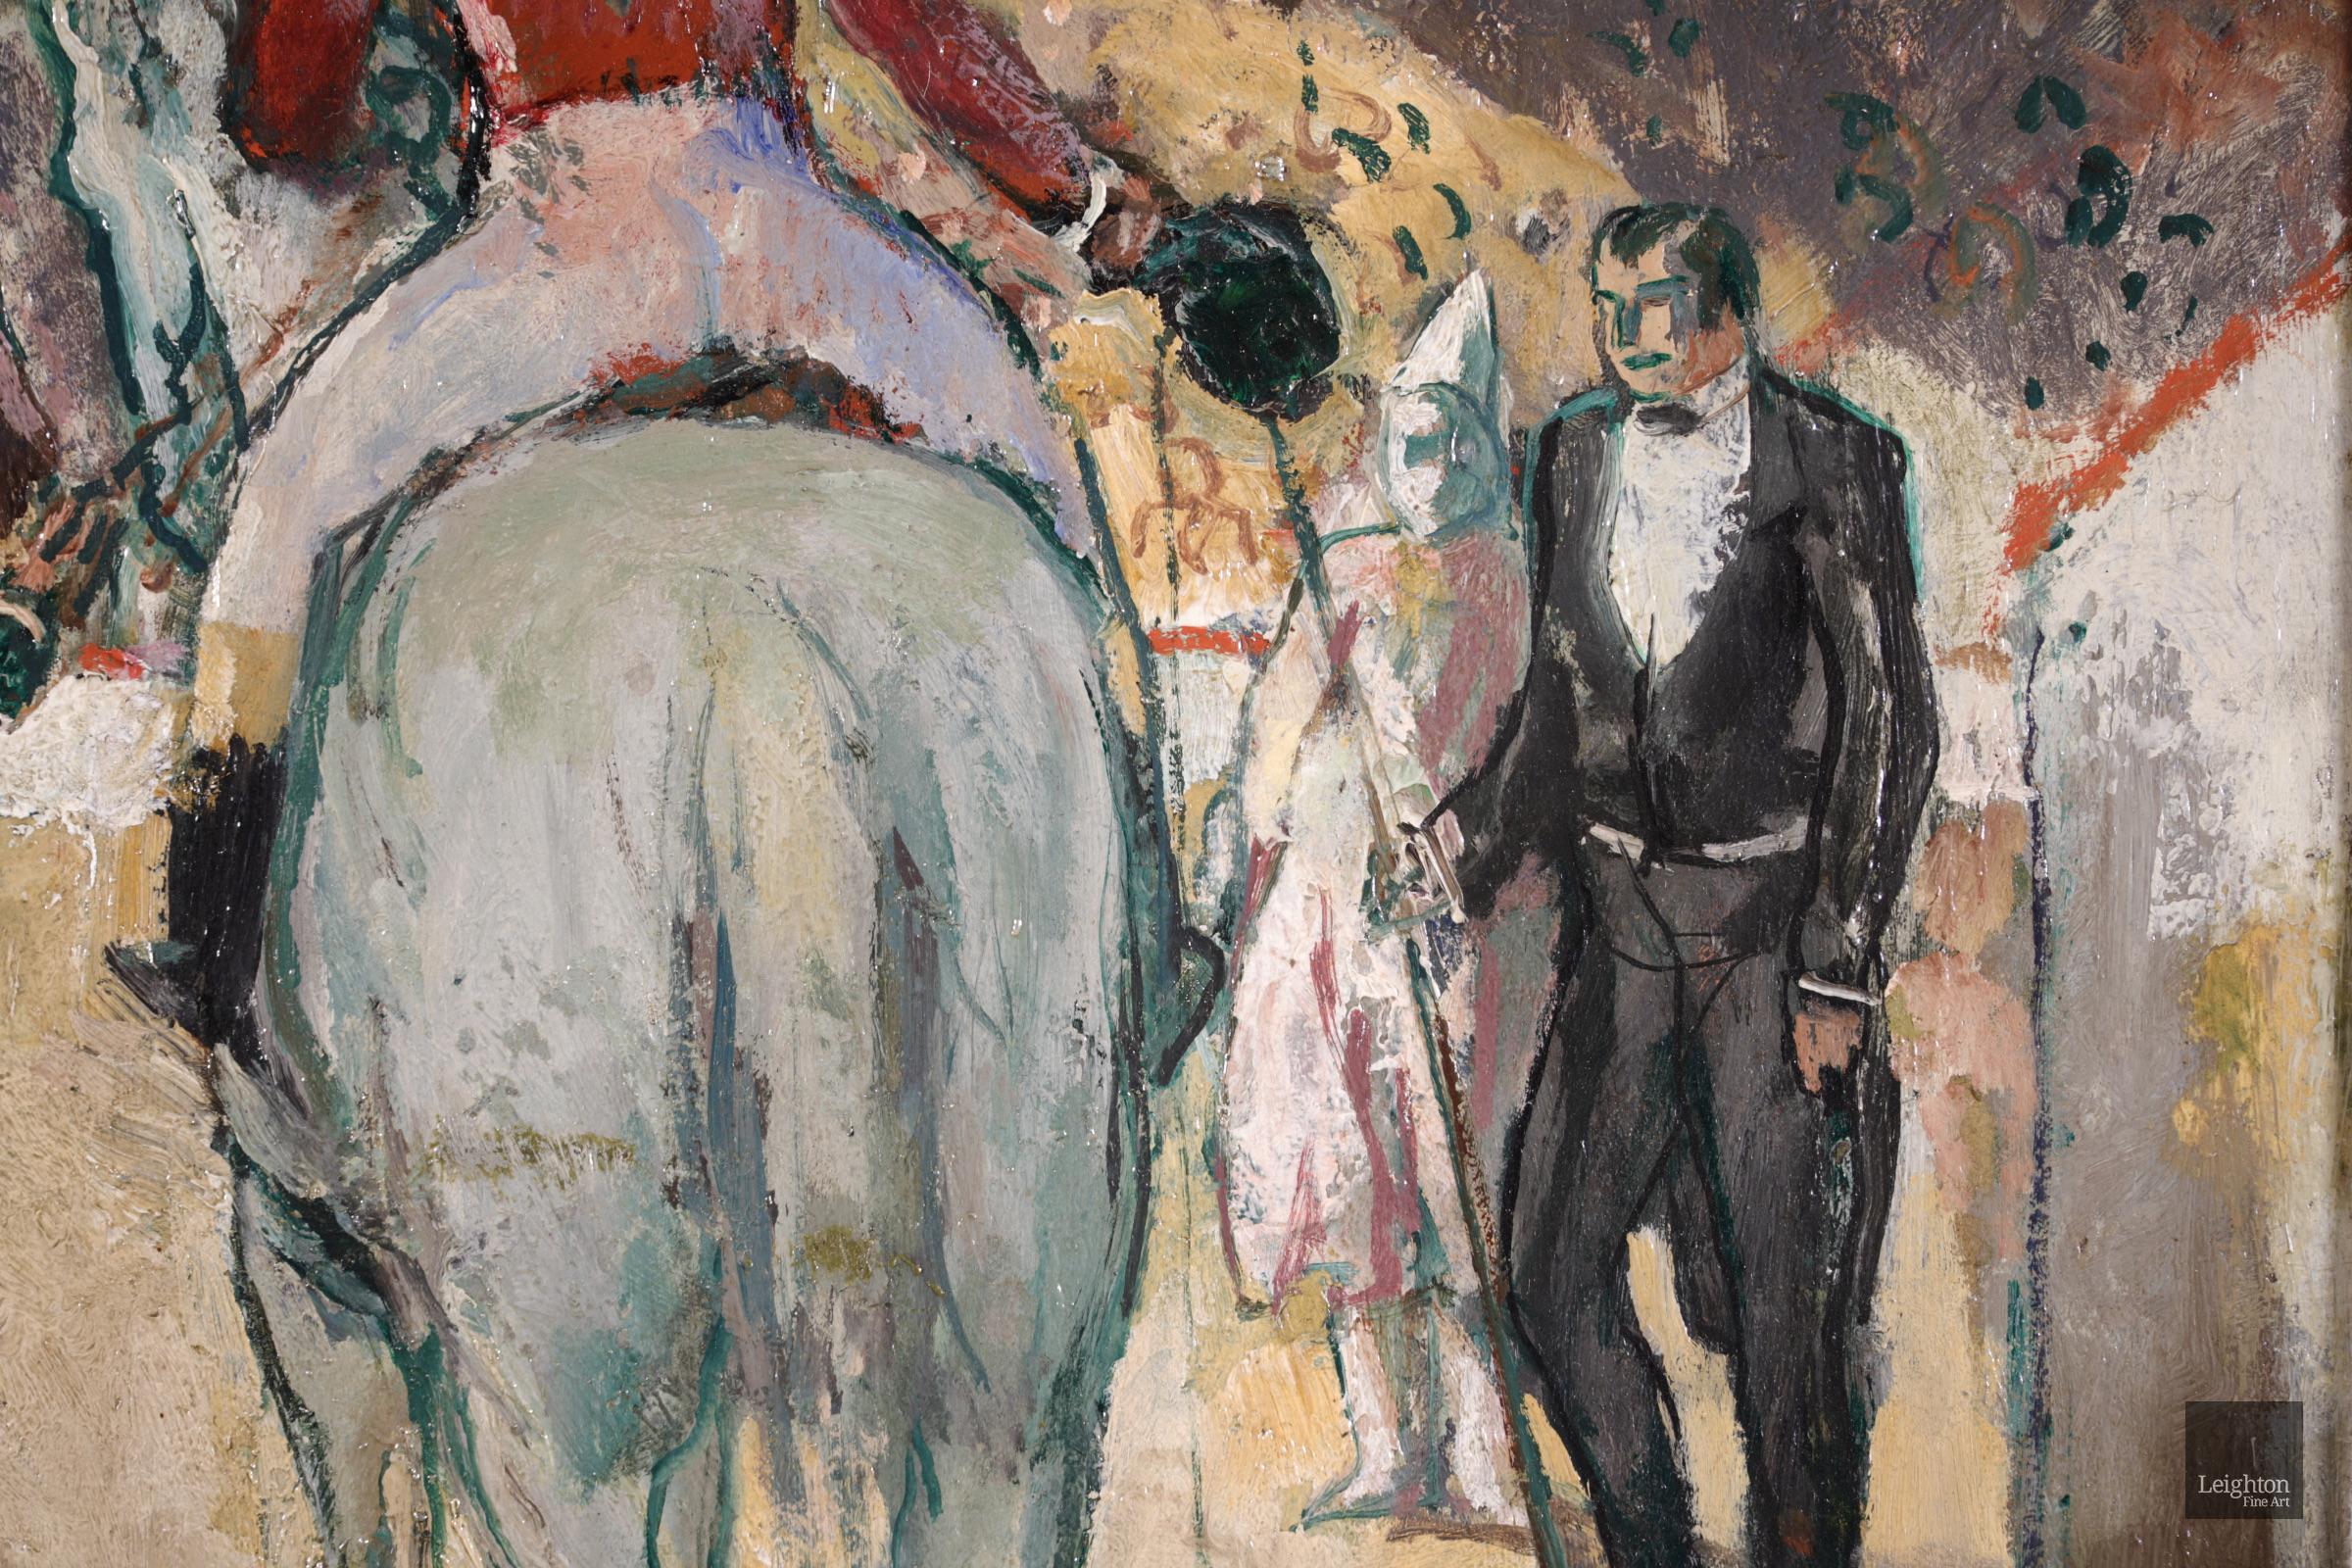 Au Cirque - Post Impressionist Oil, Figures & Horse at Circus by Marcel Cosson 1